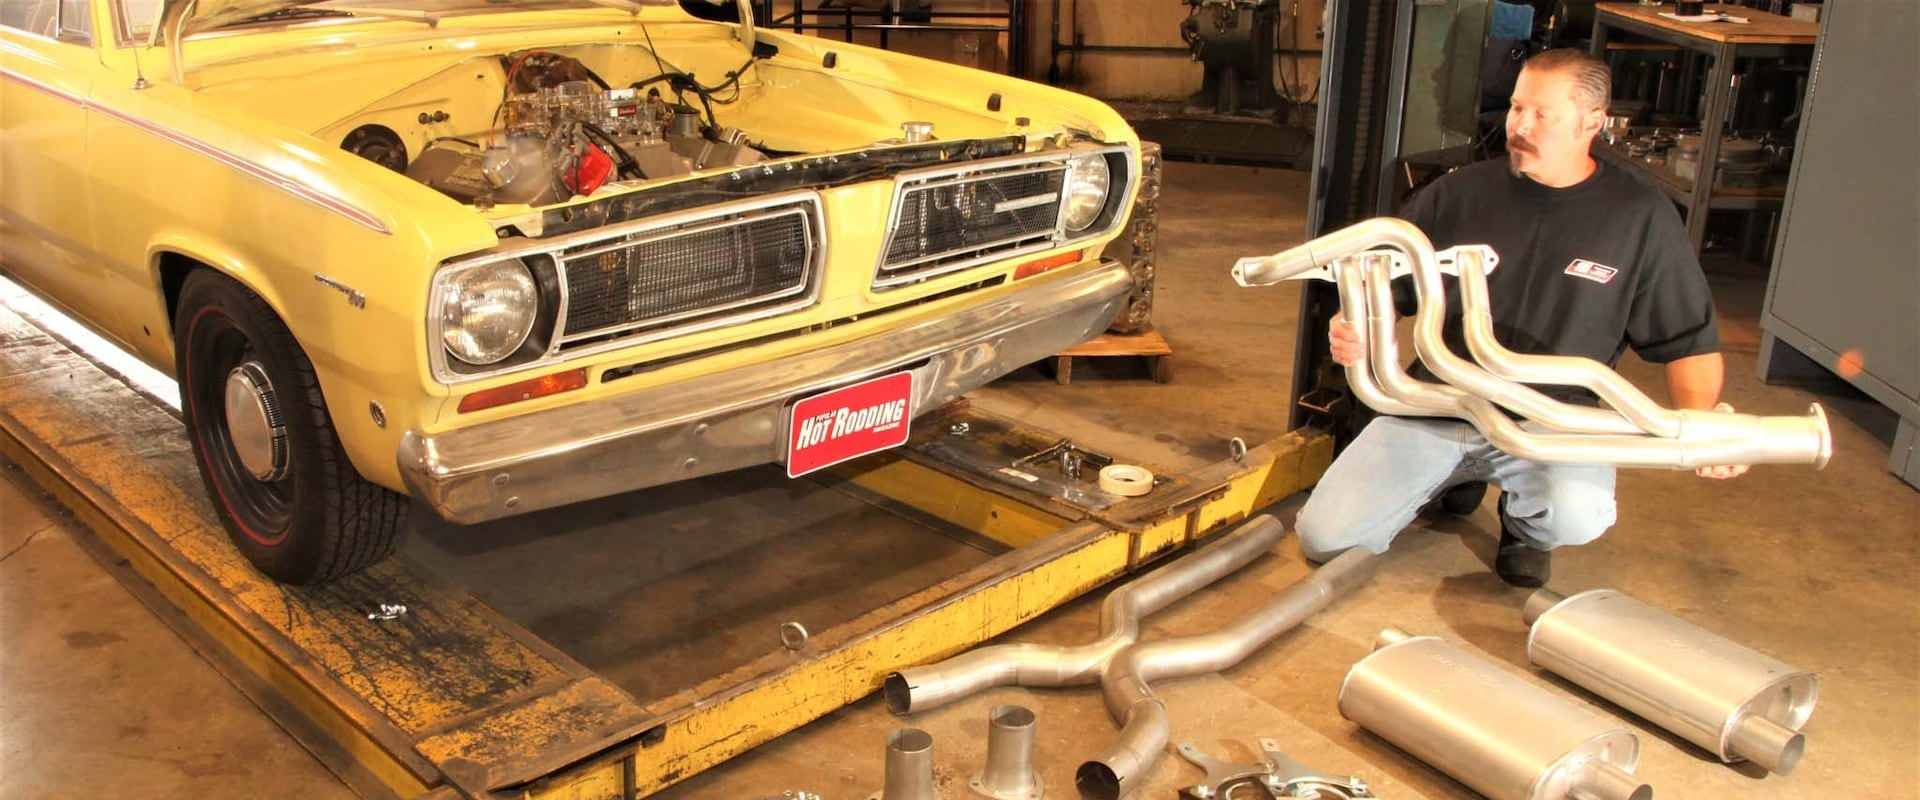 Are there any special tools needed to work on a mopar classic car?